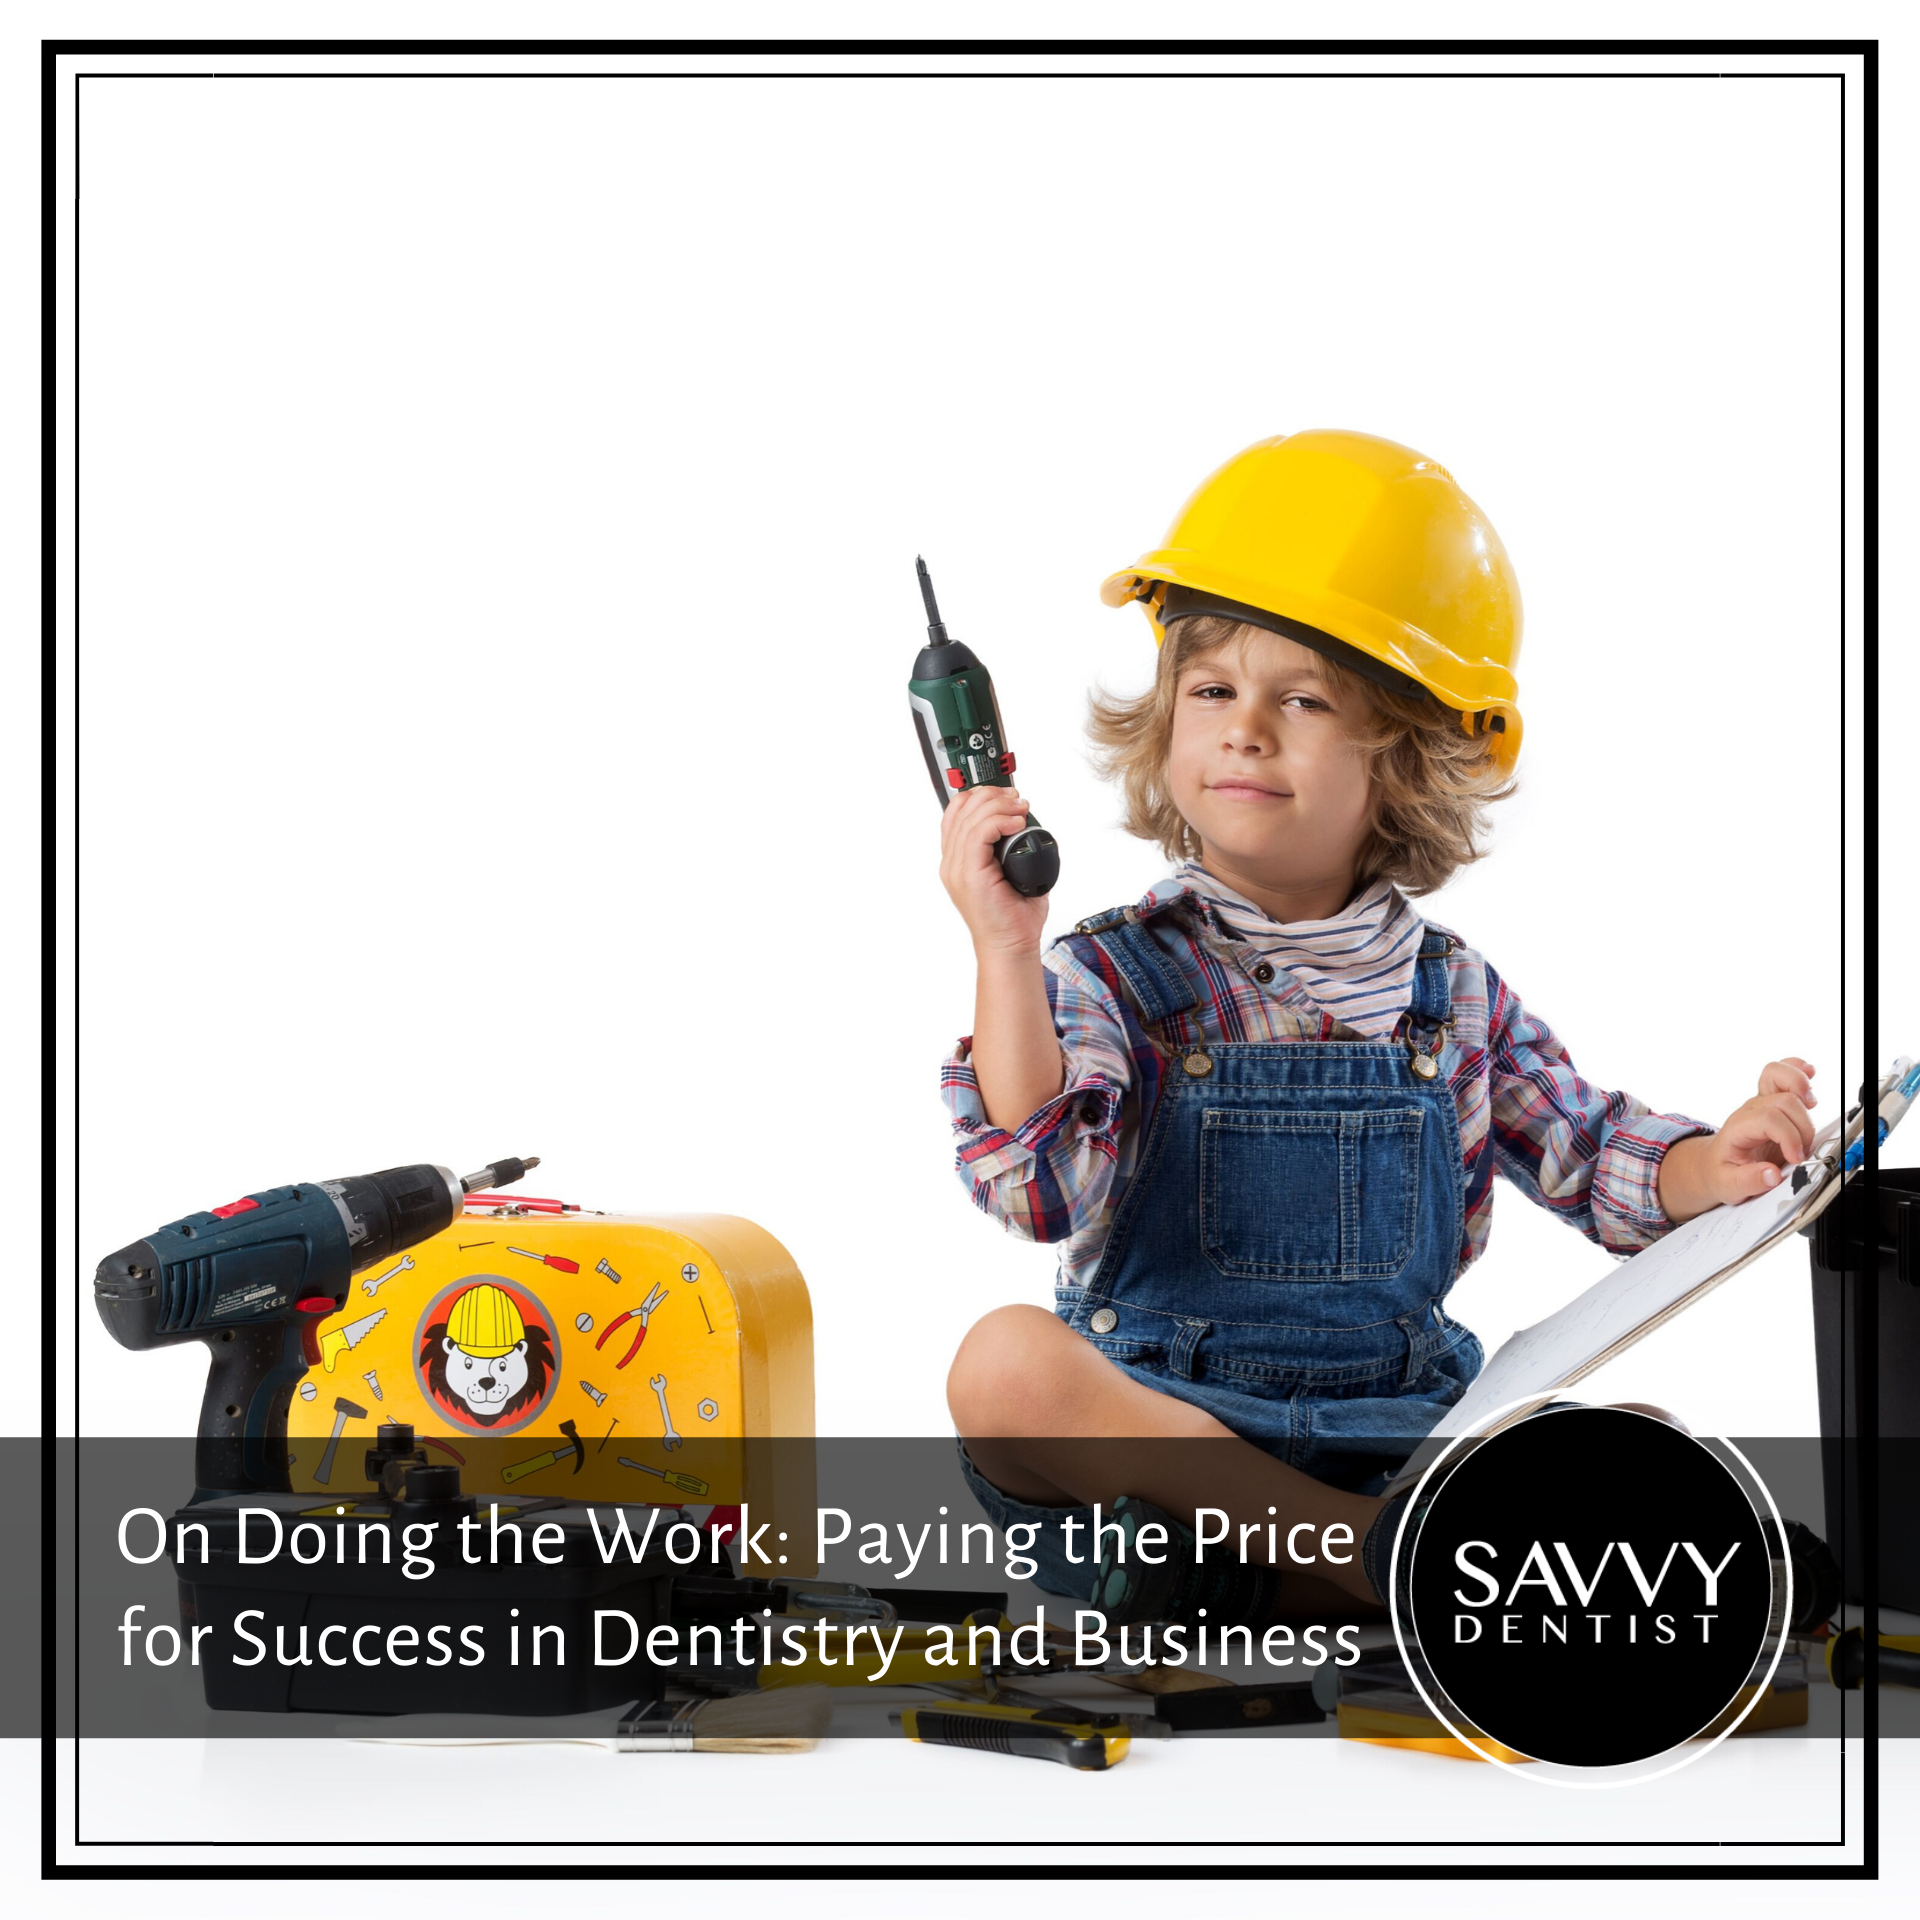 On Doing The Work: Paying the Price for Success in Dentistry and Business